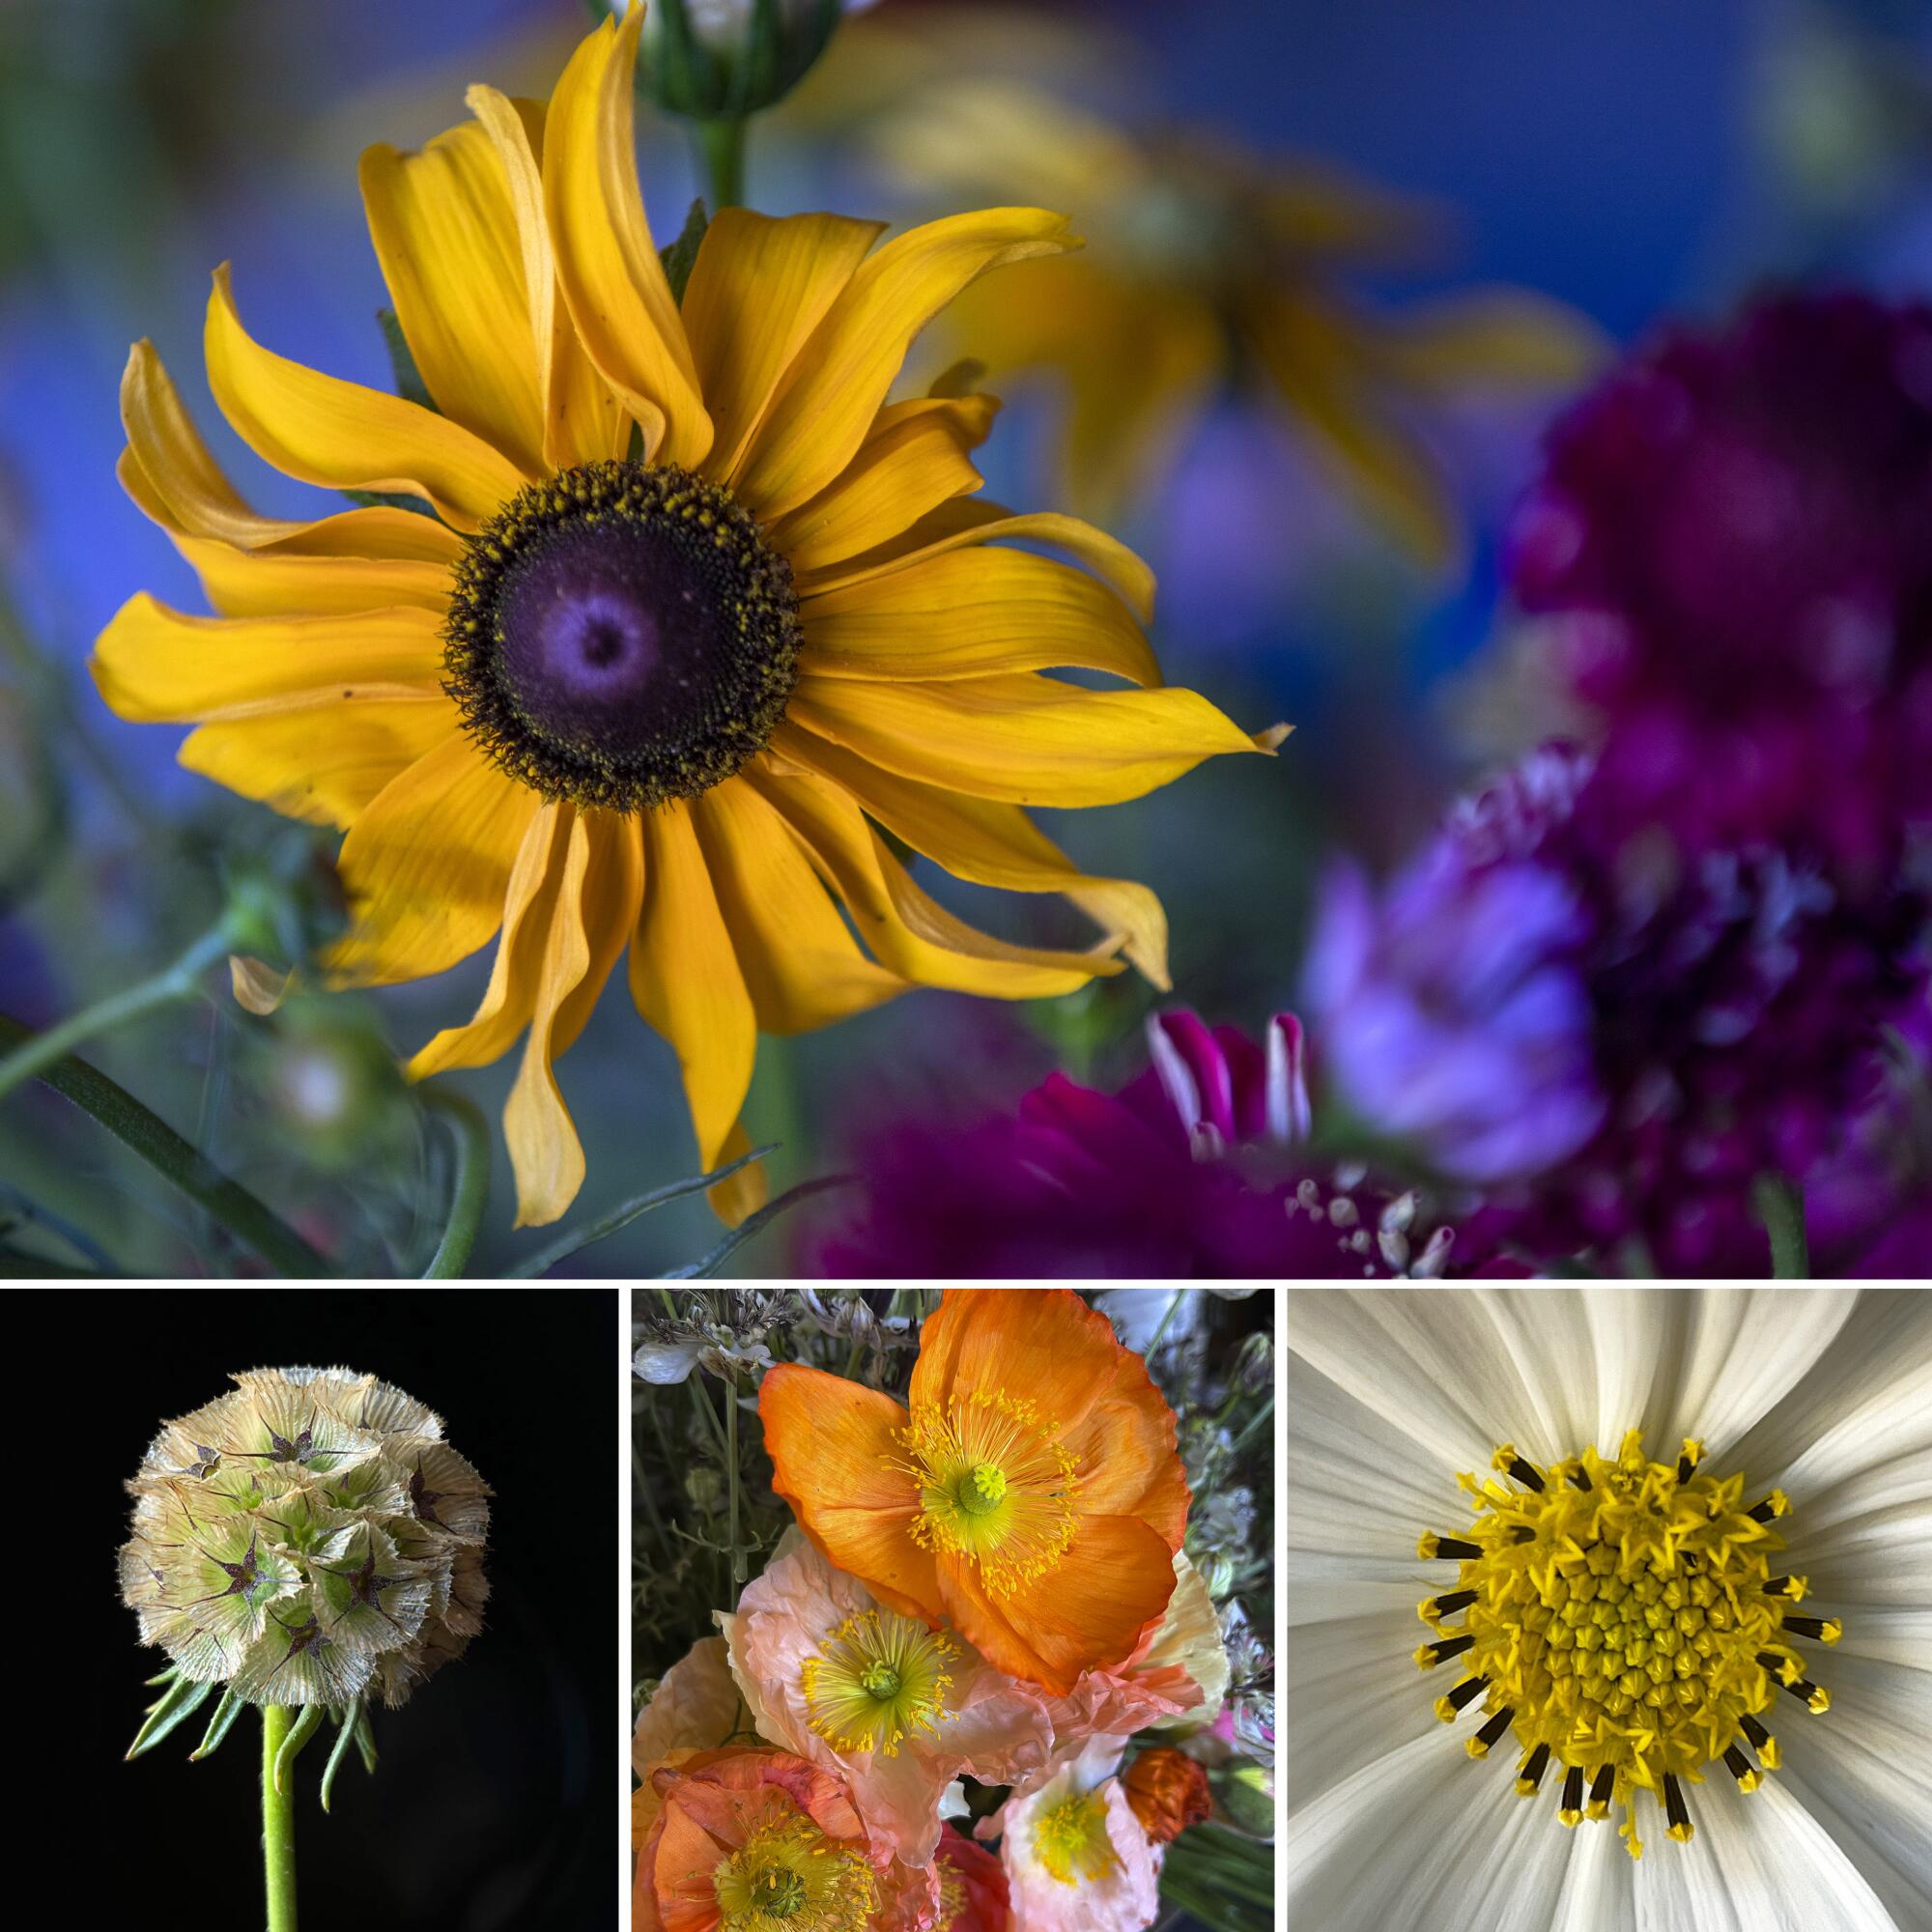 Detailed images of some of the seasonal bundles of flowers from Barn Swallow Gardens in Taylorsville.